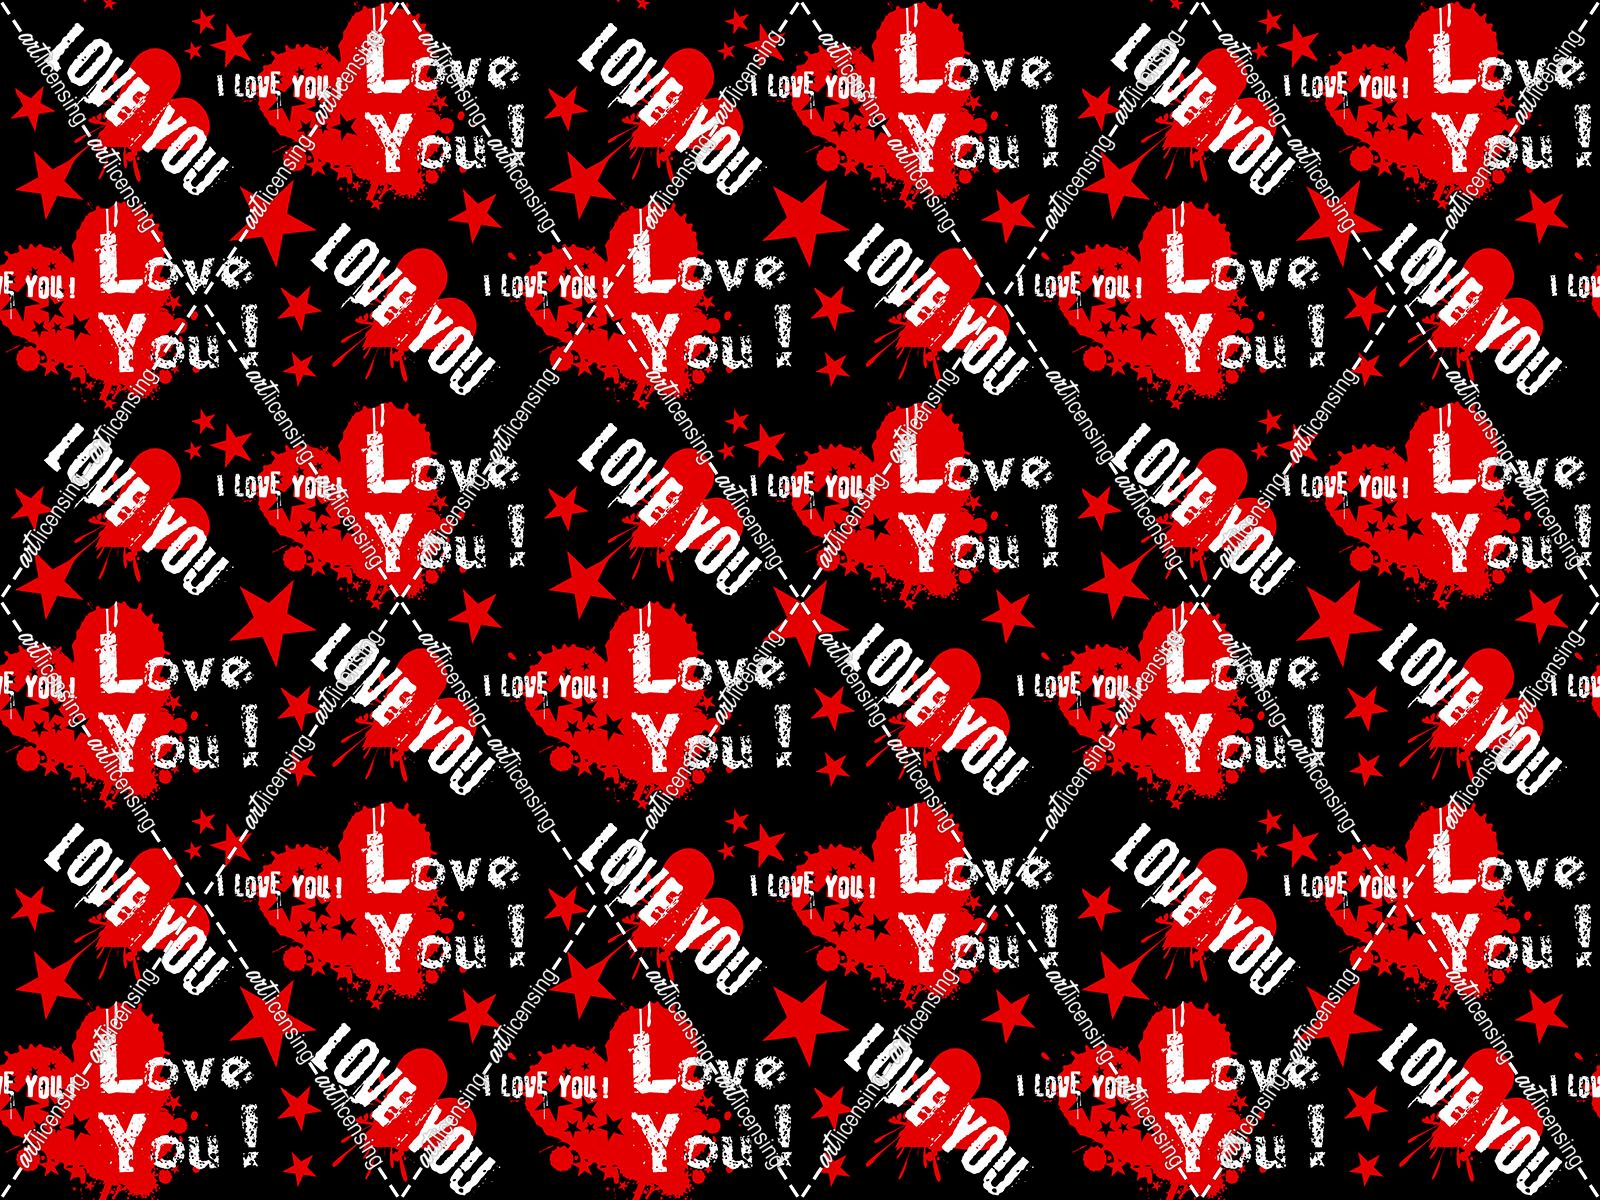 Love You 3_Repeat Pattern